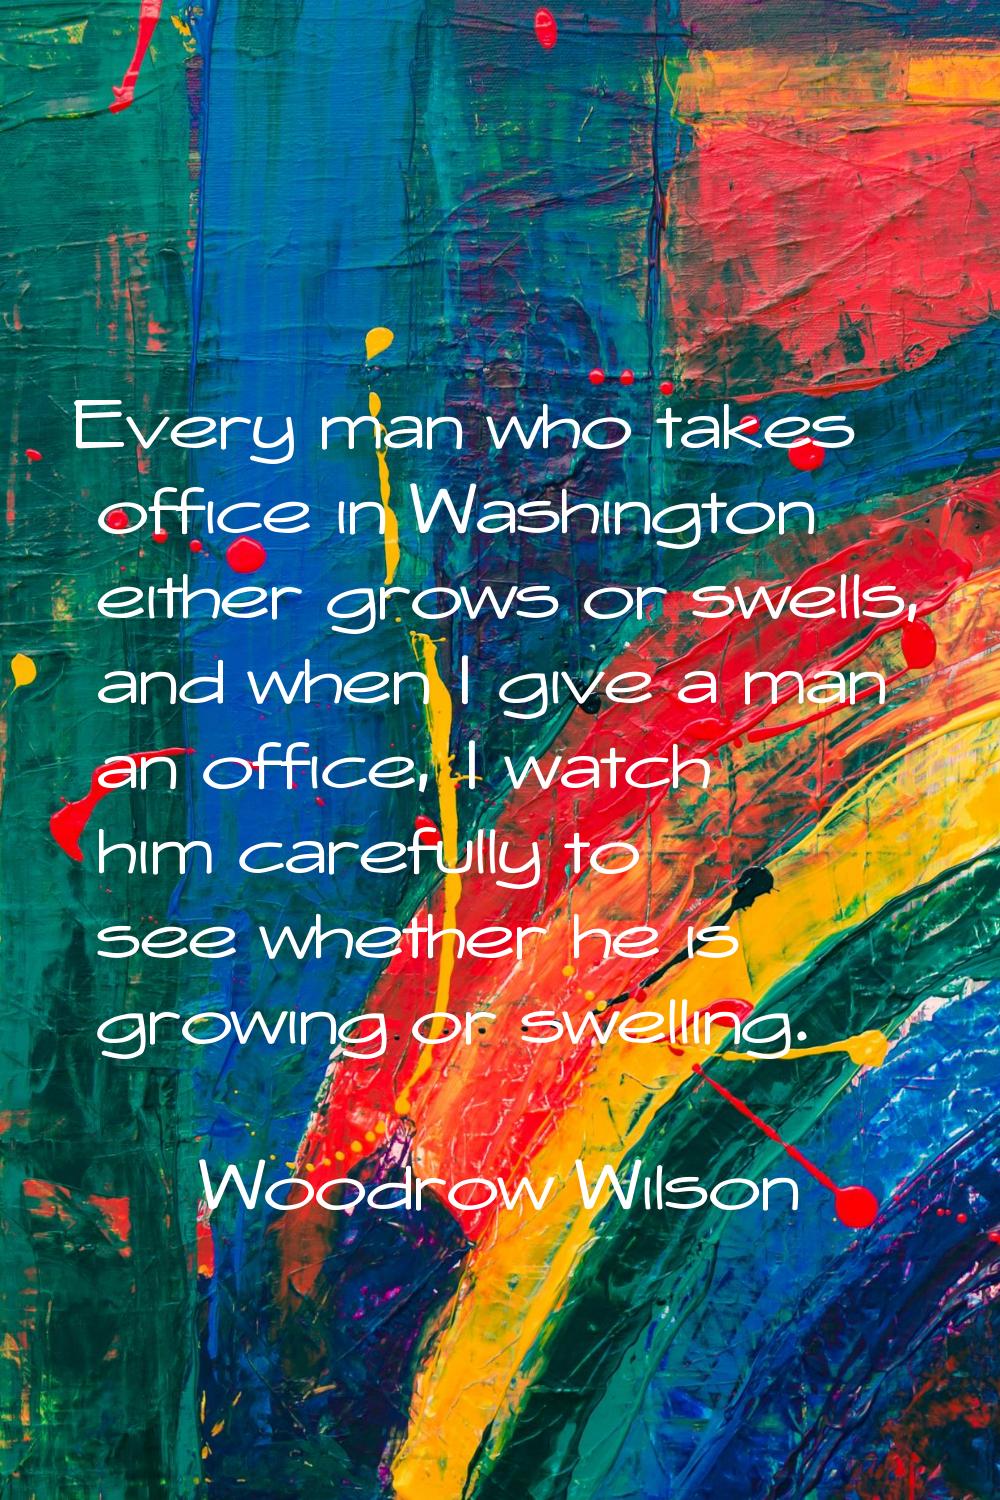 Every man who takes office in Washington either grows or swells, and when I give a man an office, I